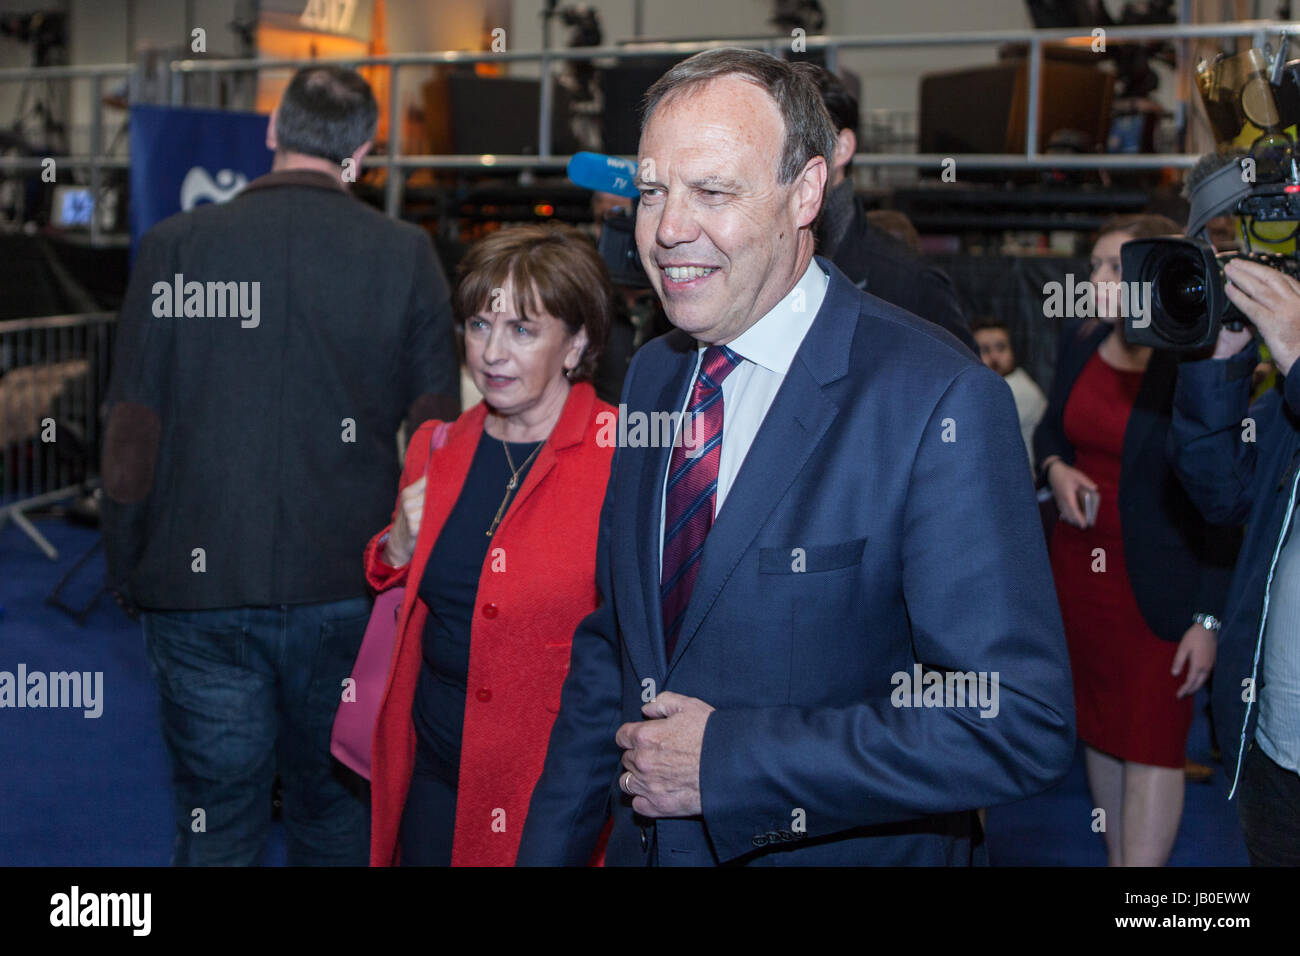 Belfast, Northern Ireland. 8th June 2017. Counting for the Belfast Area in the 2017 UK General Election got under way at the Titanic Exhibition Centre. Nigel and Diane Dodds Arrive at the Count centre in Belfast, Mr Dodds is hoping to hold the Seat of Belfast North Credit: Bonzo/Alamy Live News Stock Photo